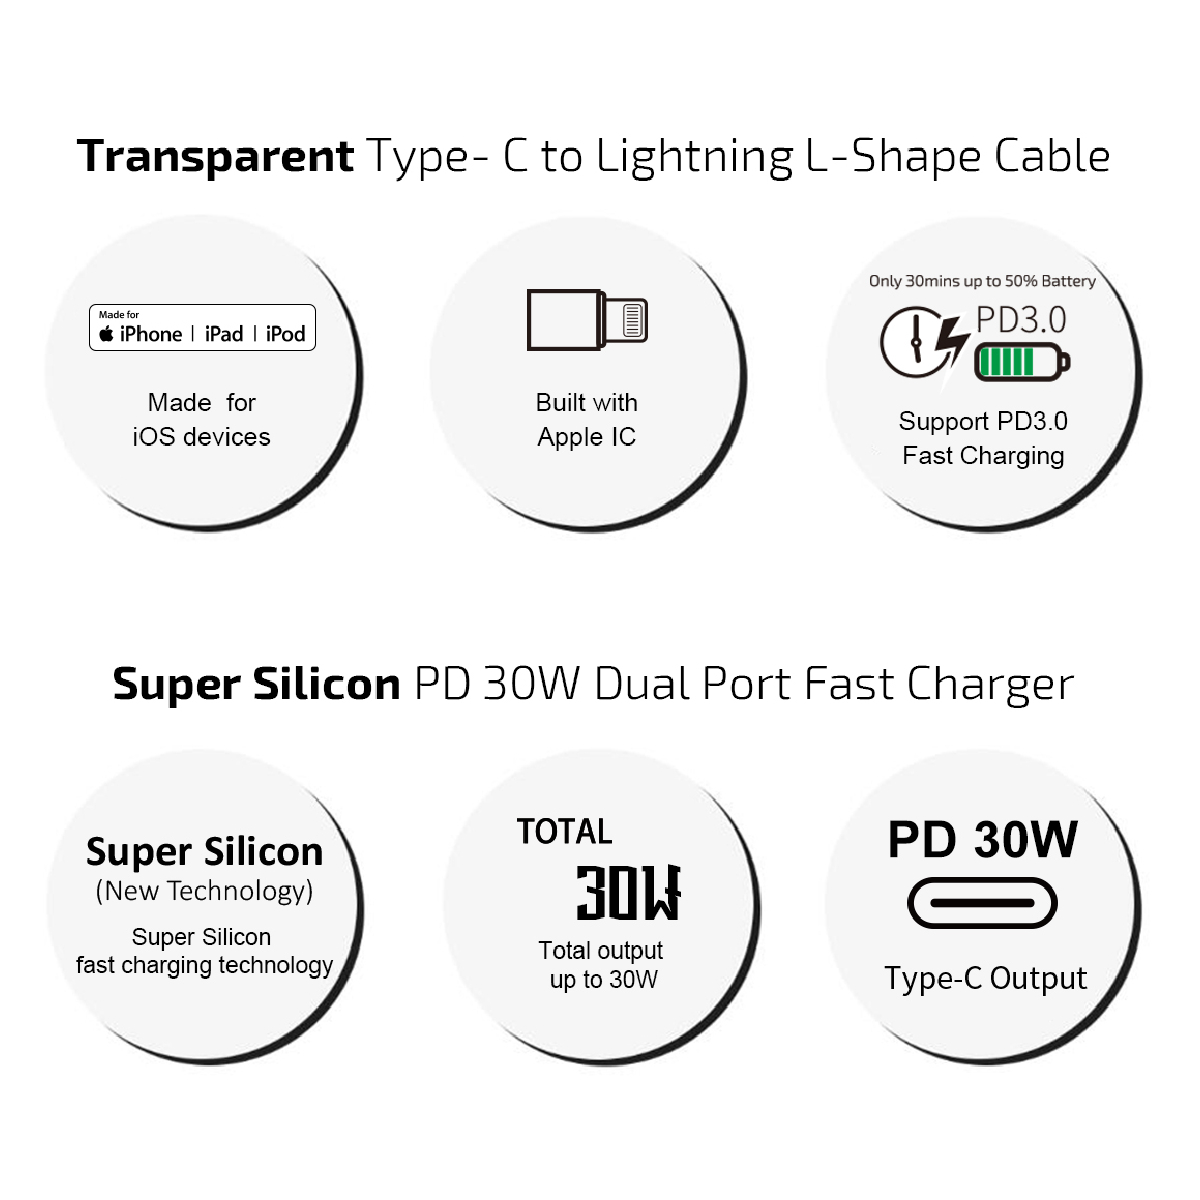 inno3C i-LP30W Super Silicon PD 30W Dual Port Fast Charger + Transparent Type-C to Lightning L-Shape Cable (White / Transparent), , large image number 4